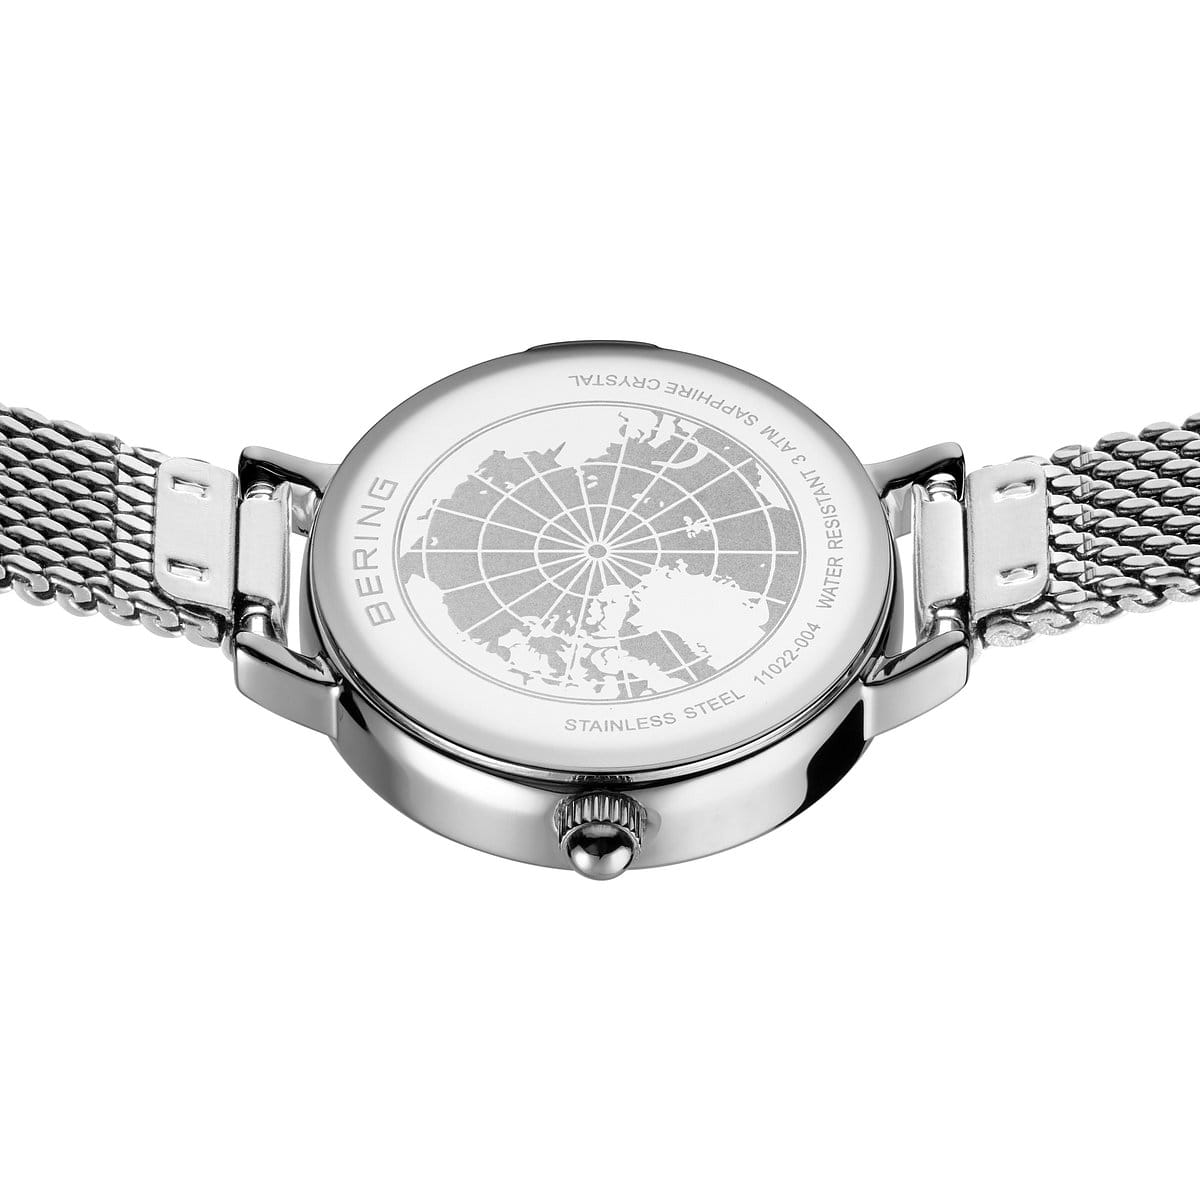 Bering Classic - Polished Silver